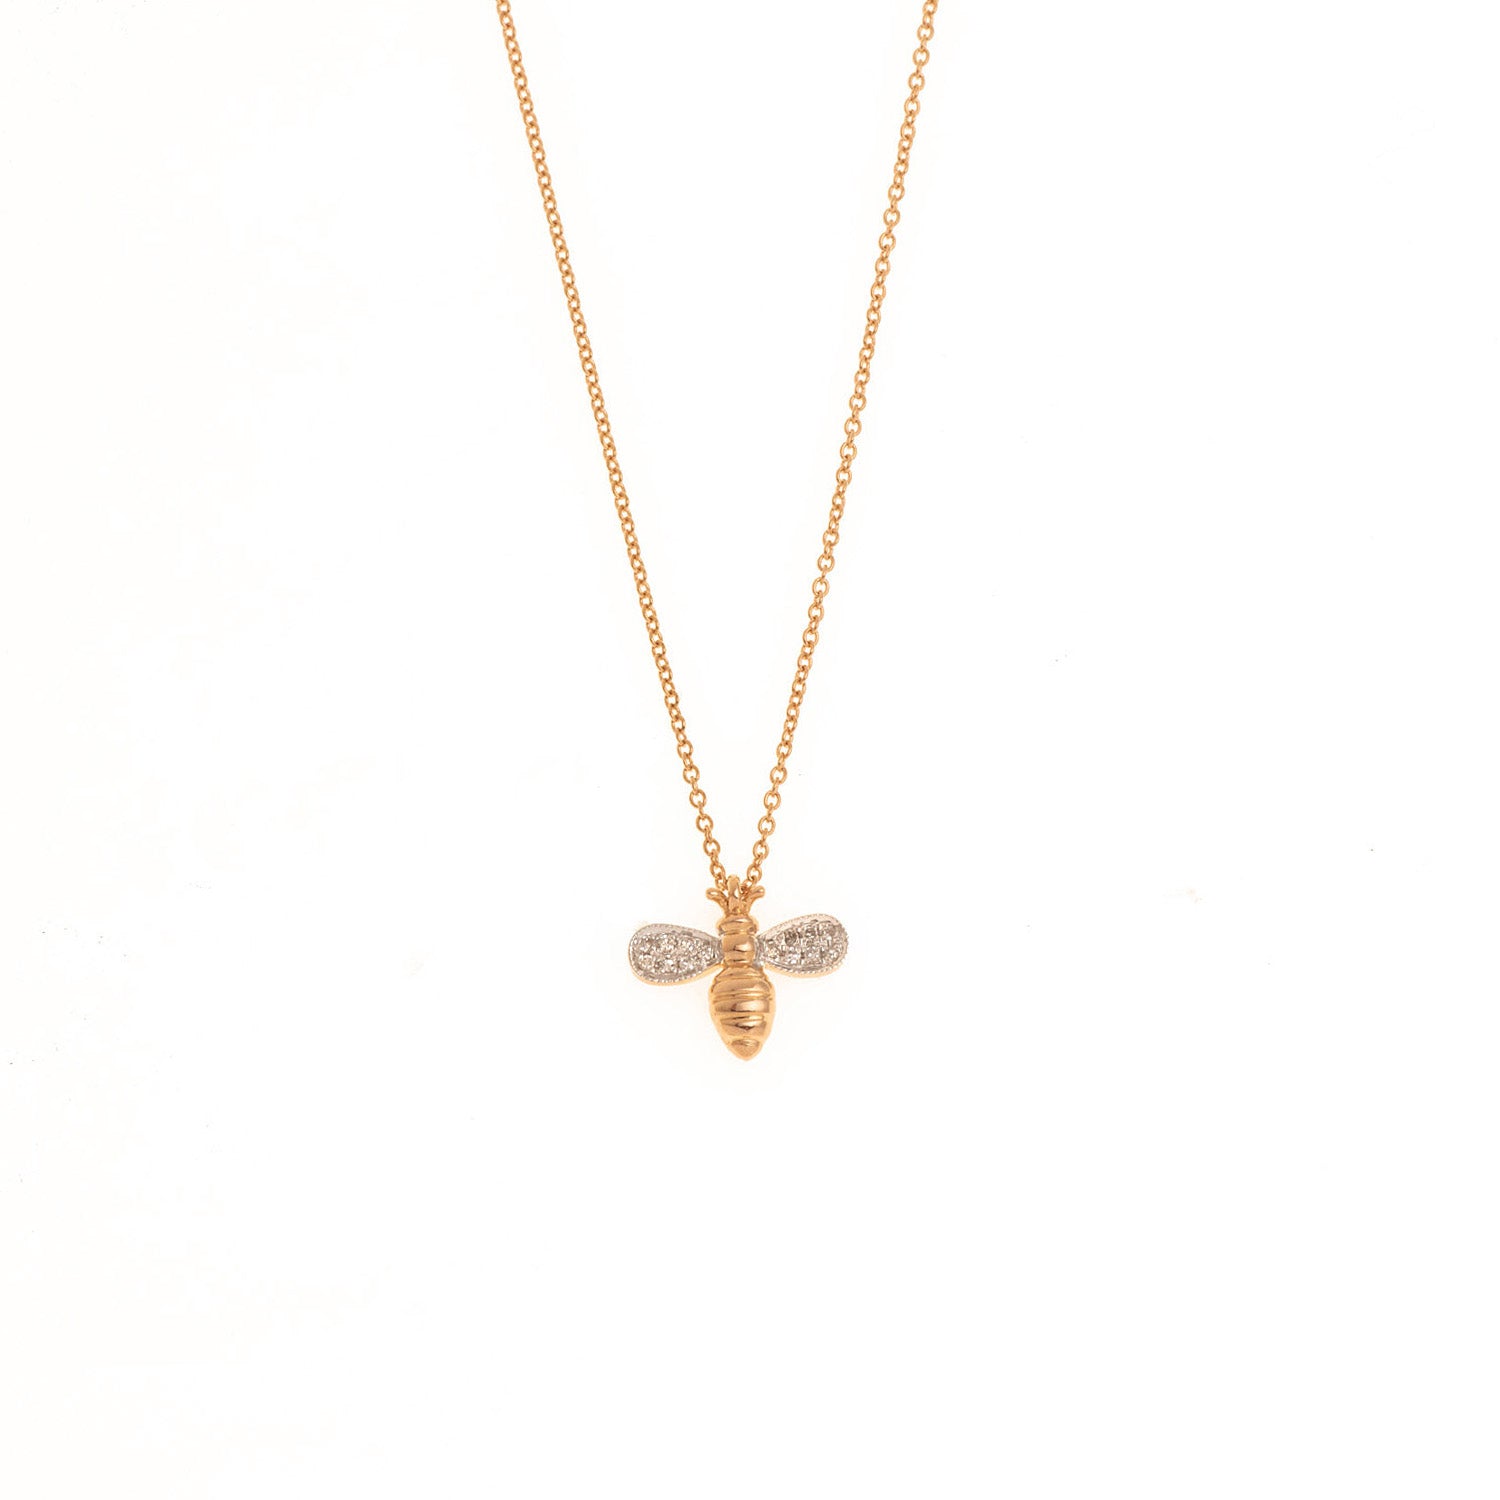 Symbol necklace. Heart, butterfly, round necklace. Gift necklace. Gold necklace. Diamond necklace. Precious stone necklace. Chain necklace. Easy to wear necklace. Anatol jewelry. Fine jewelry. Golden Hall. Kifissia. Athens. Χρυσό κολιέ. Κολιέ με διαμάντια. Χρυσά κοσμήματα. Κηφισιά. Κολιέ με μπριγιάν. 